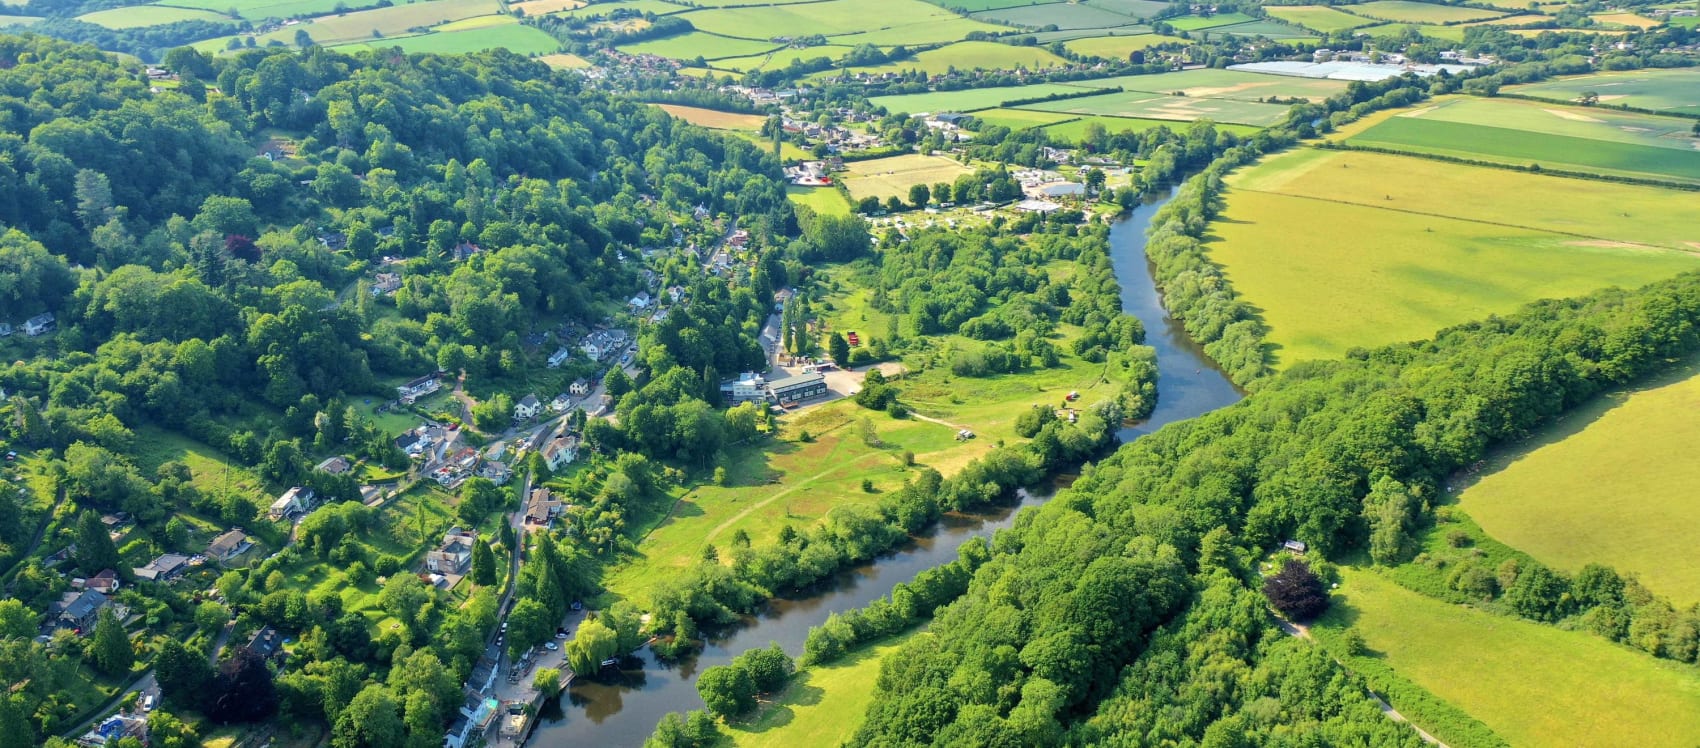 New Project Planned To Reverse The Decline of the River Wye